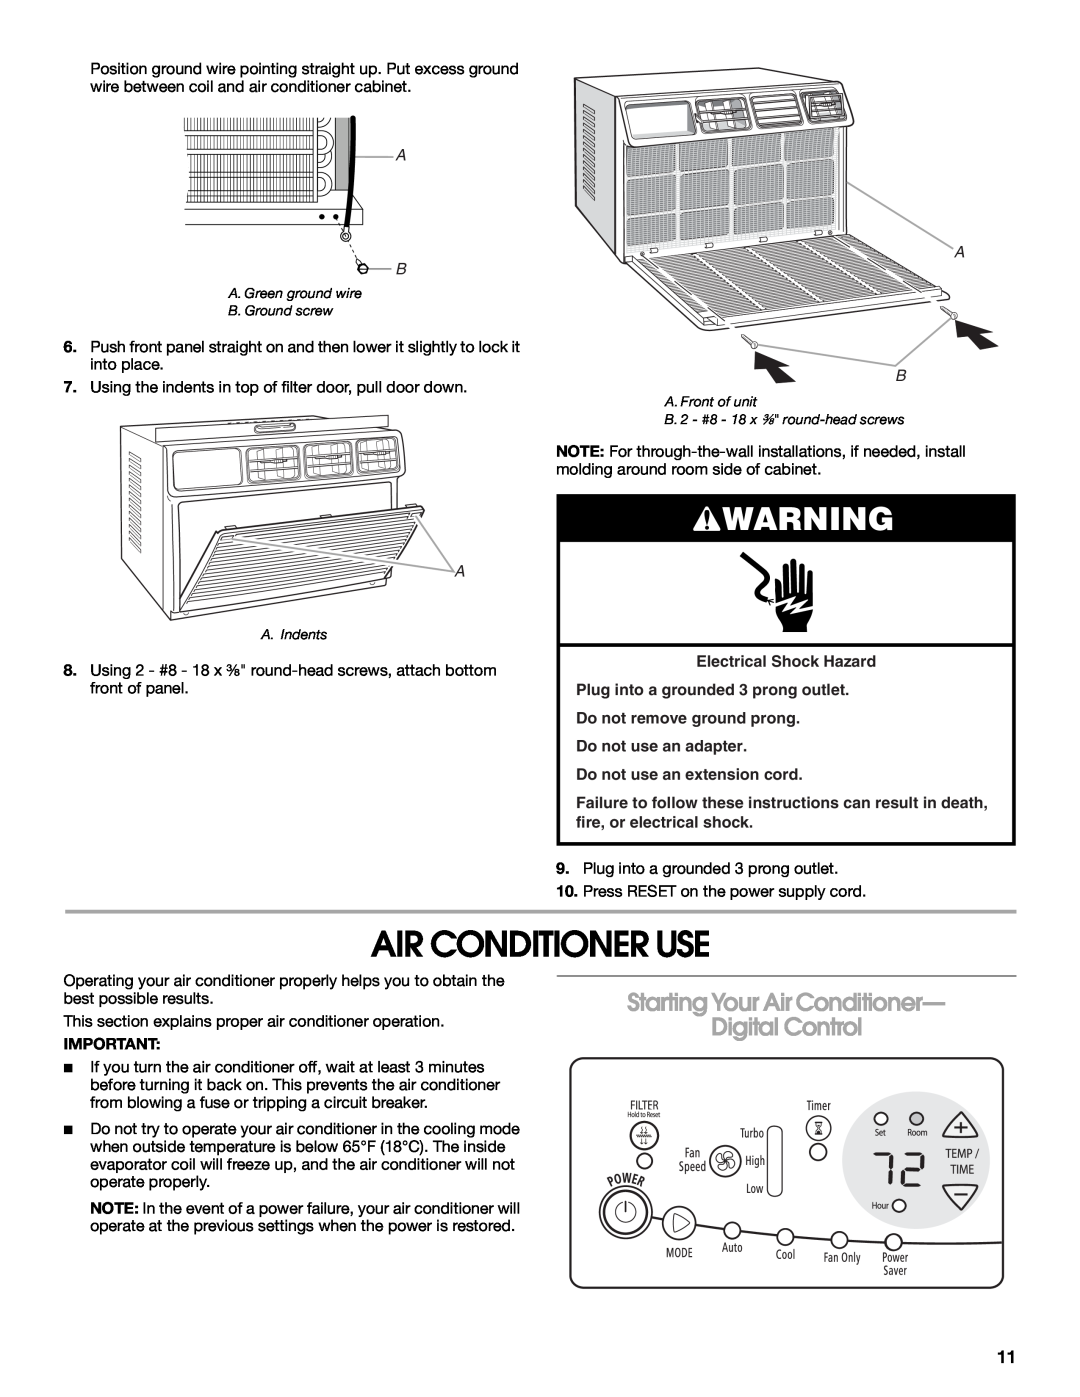 Whirlpool ACE184XR0 manual Air Conditioner Use, Starting Your Air Conditioner- Digital Control, Electrical Shock Hazard 